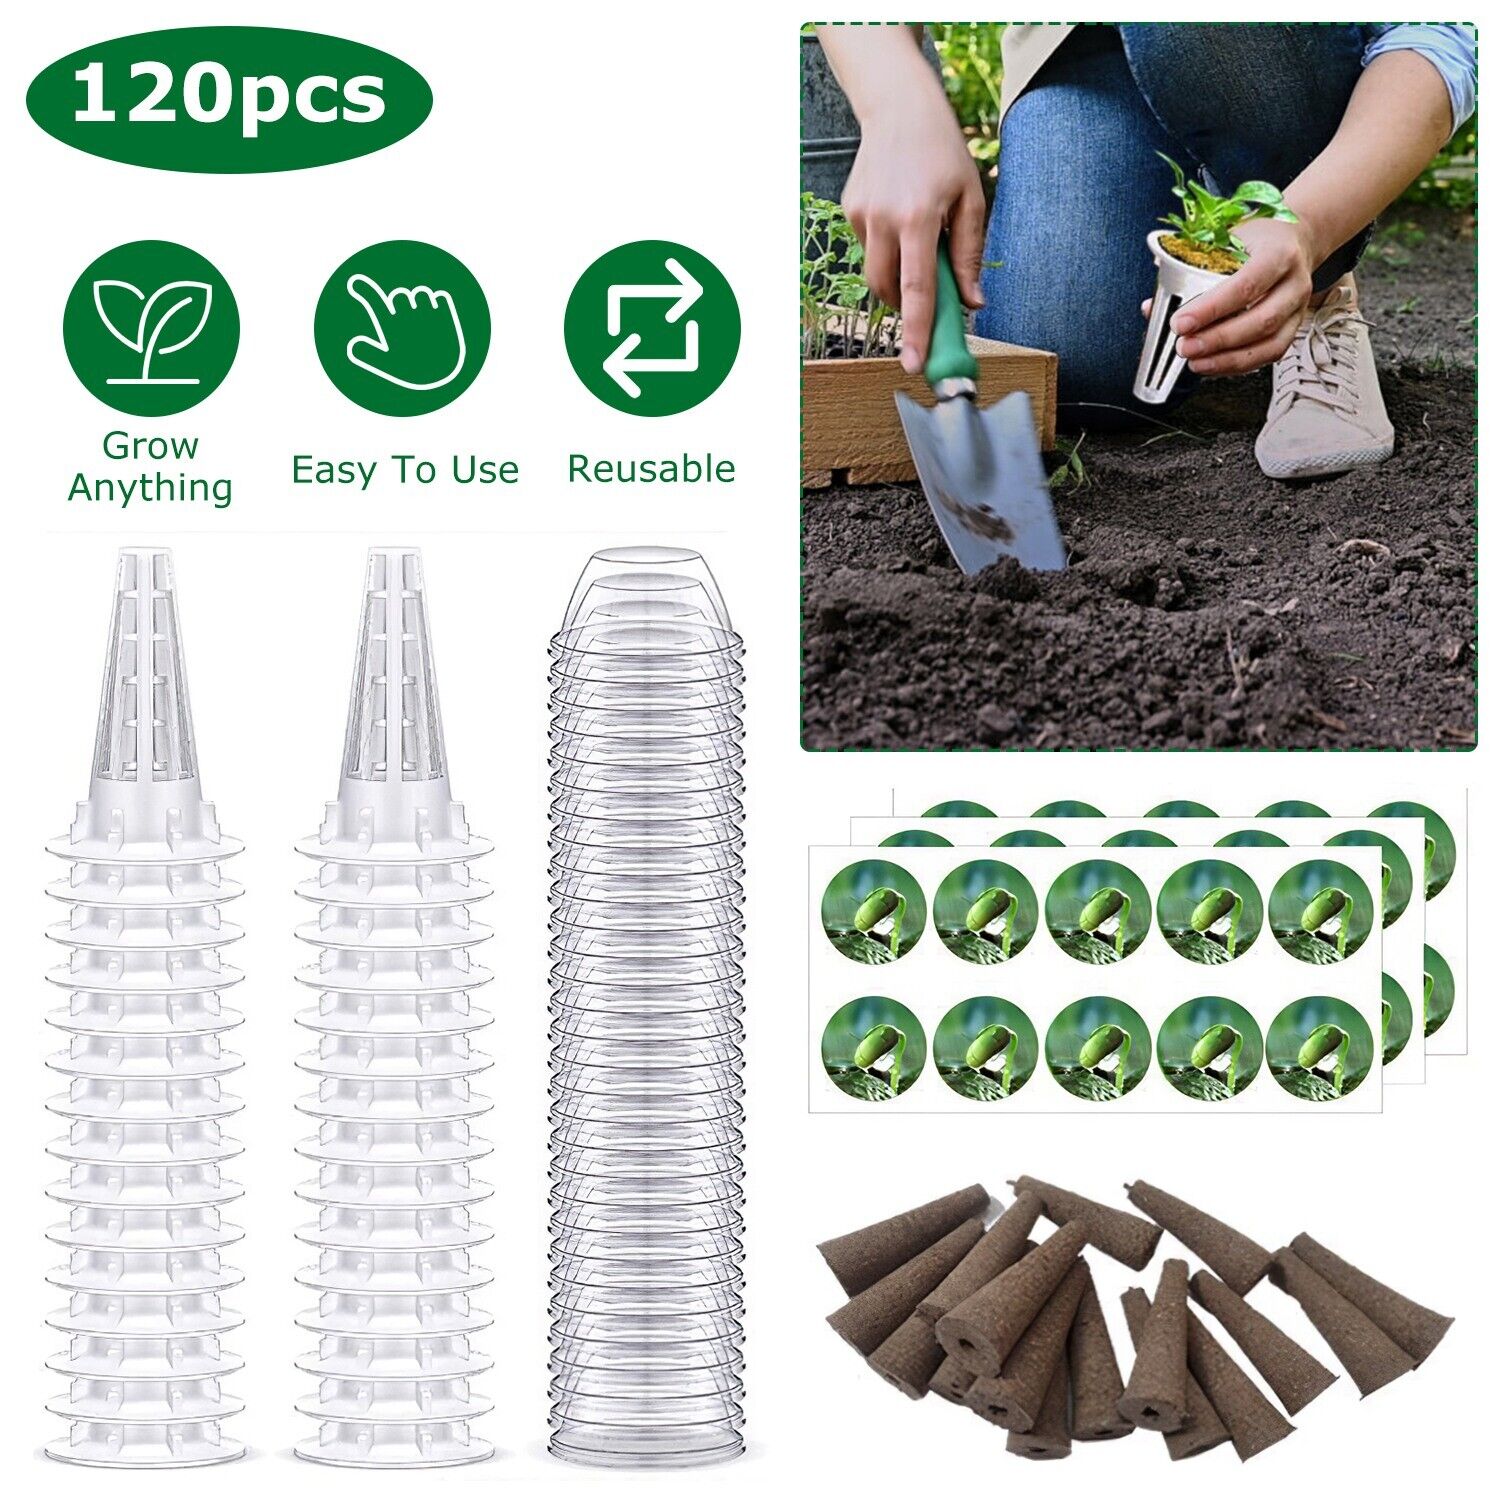 30 Pack Hydroponic-Garden System Seed-Pods Kit-30 Grow Baskets 30 Sponges & Lids